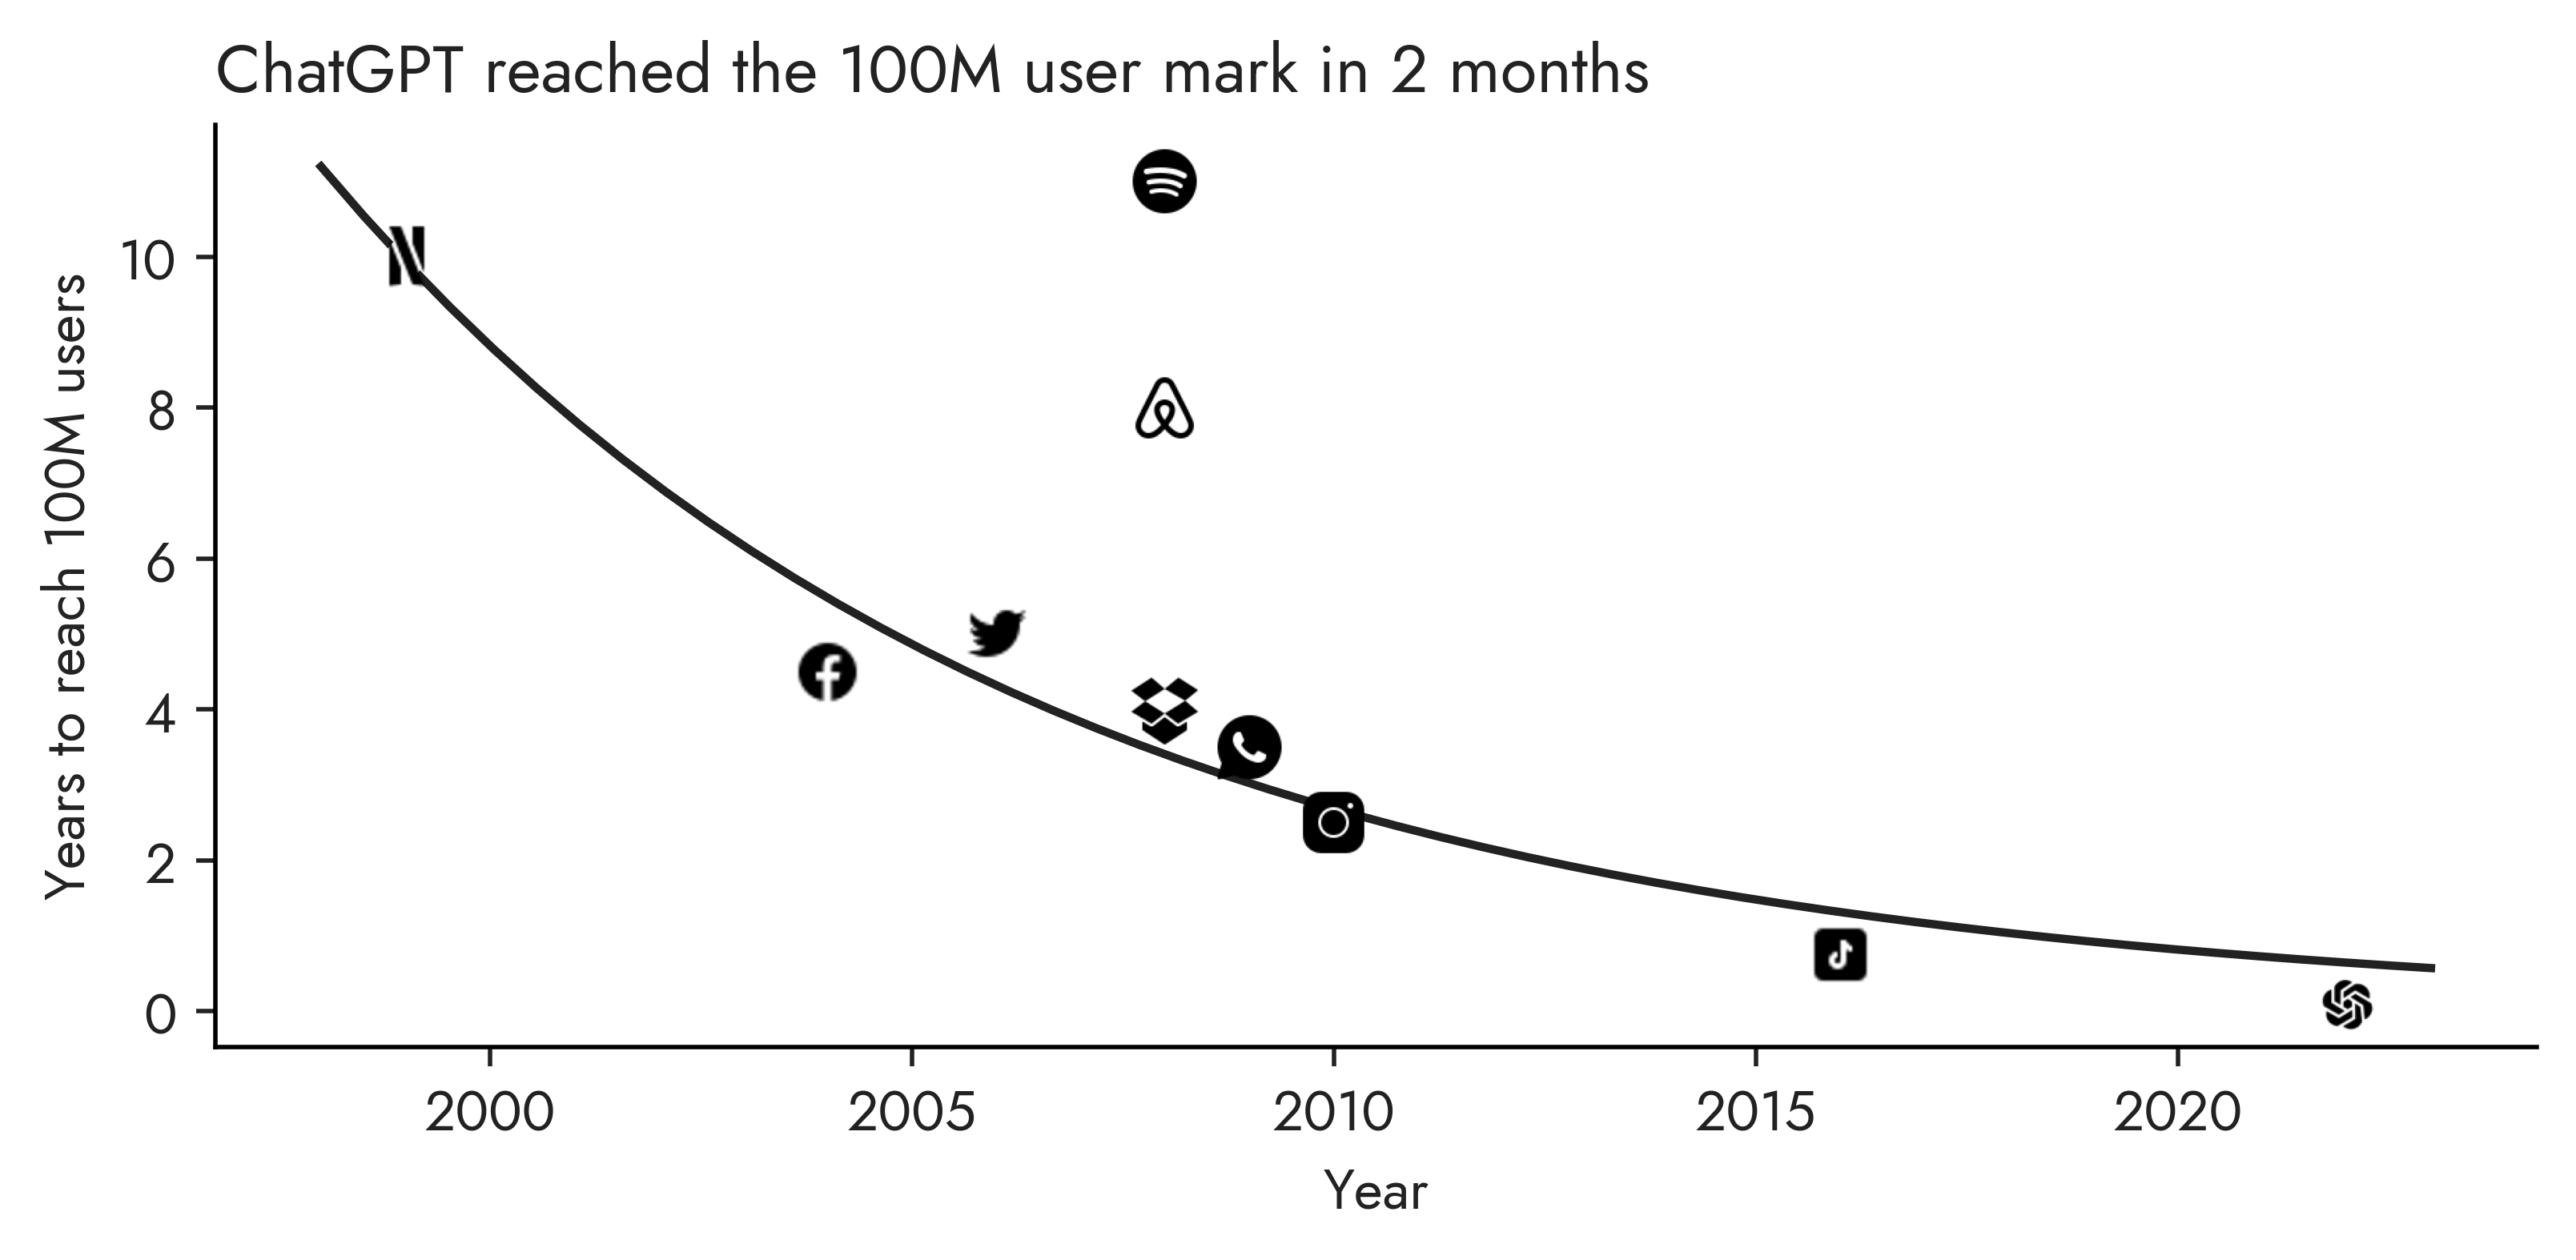 Figure shows the number of years to 100 million users for various consumer technology products over time on a gradual decline, from Netflix having taken a decade in the 1990s to ChatGPT only a few months in 2022.